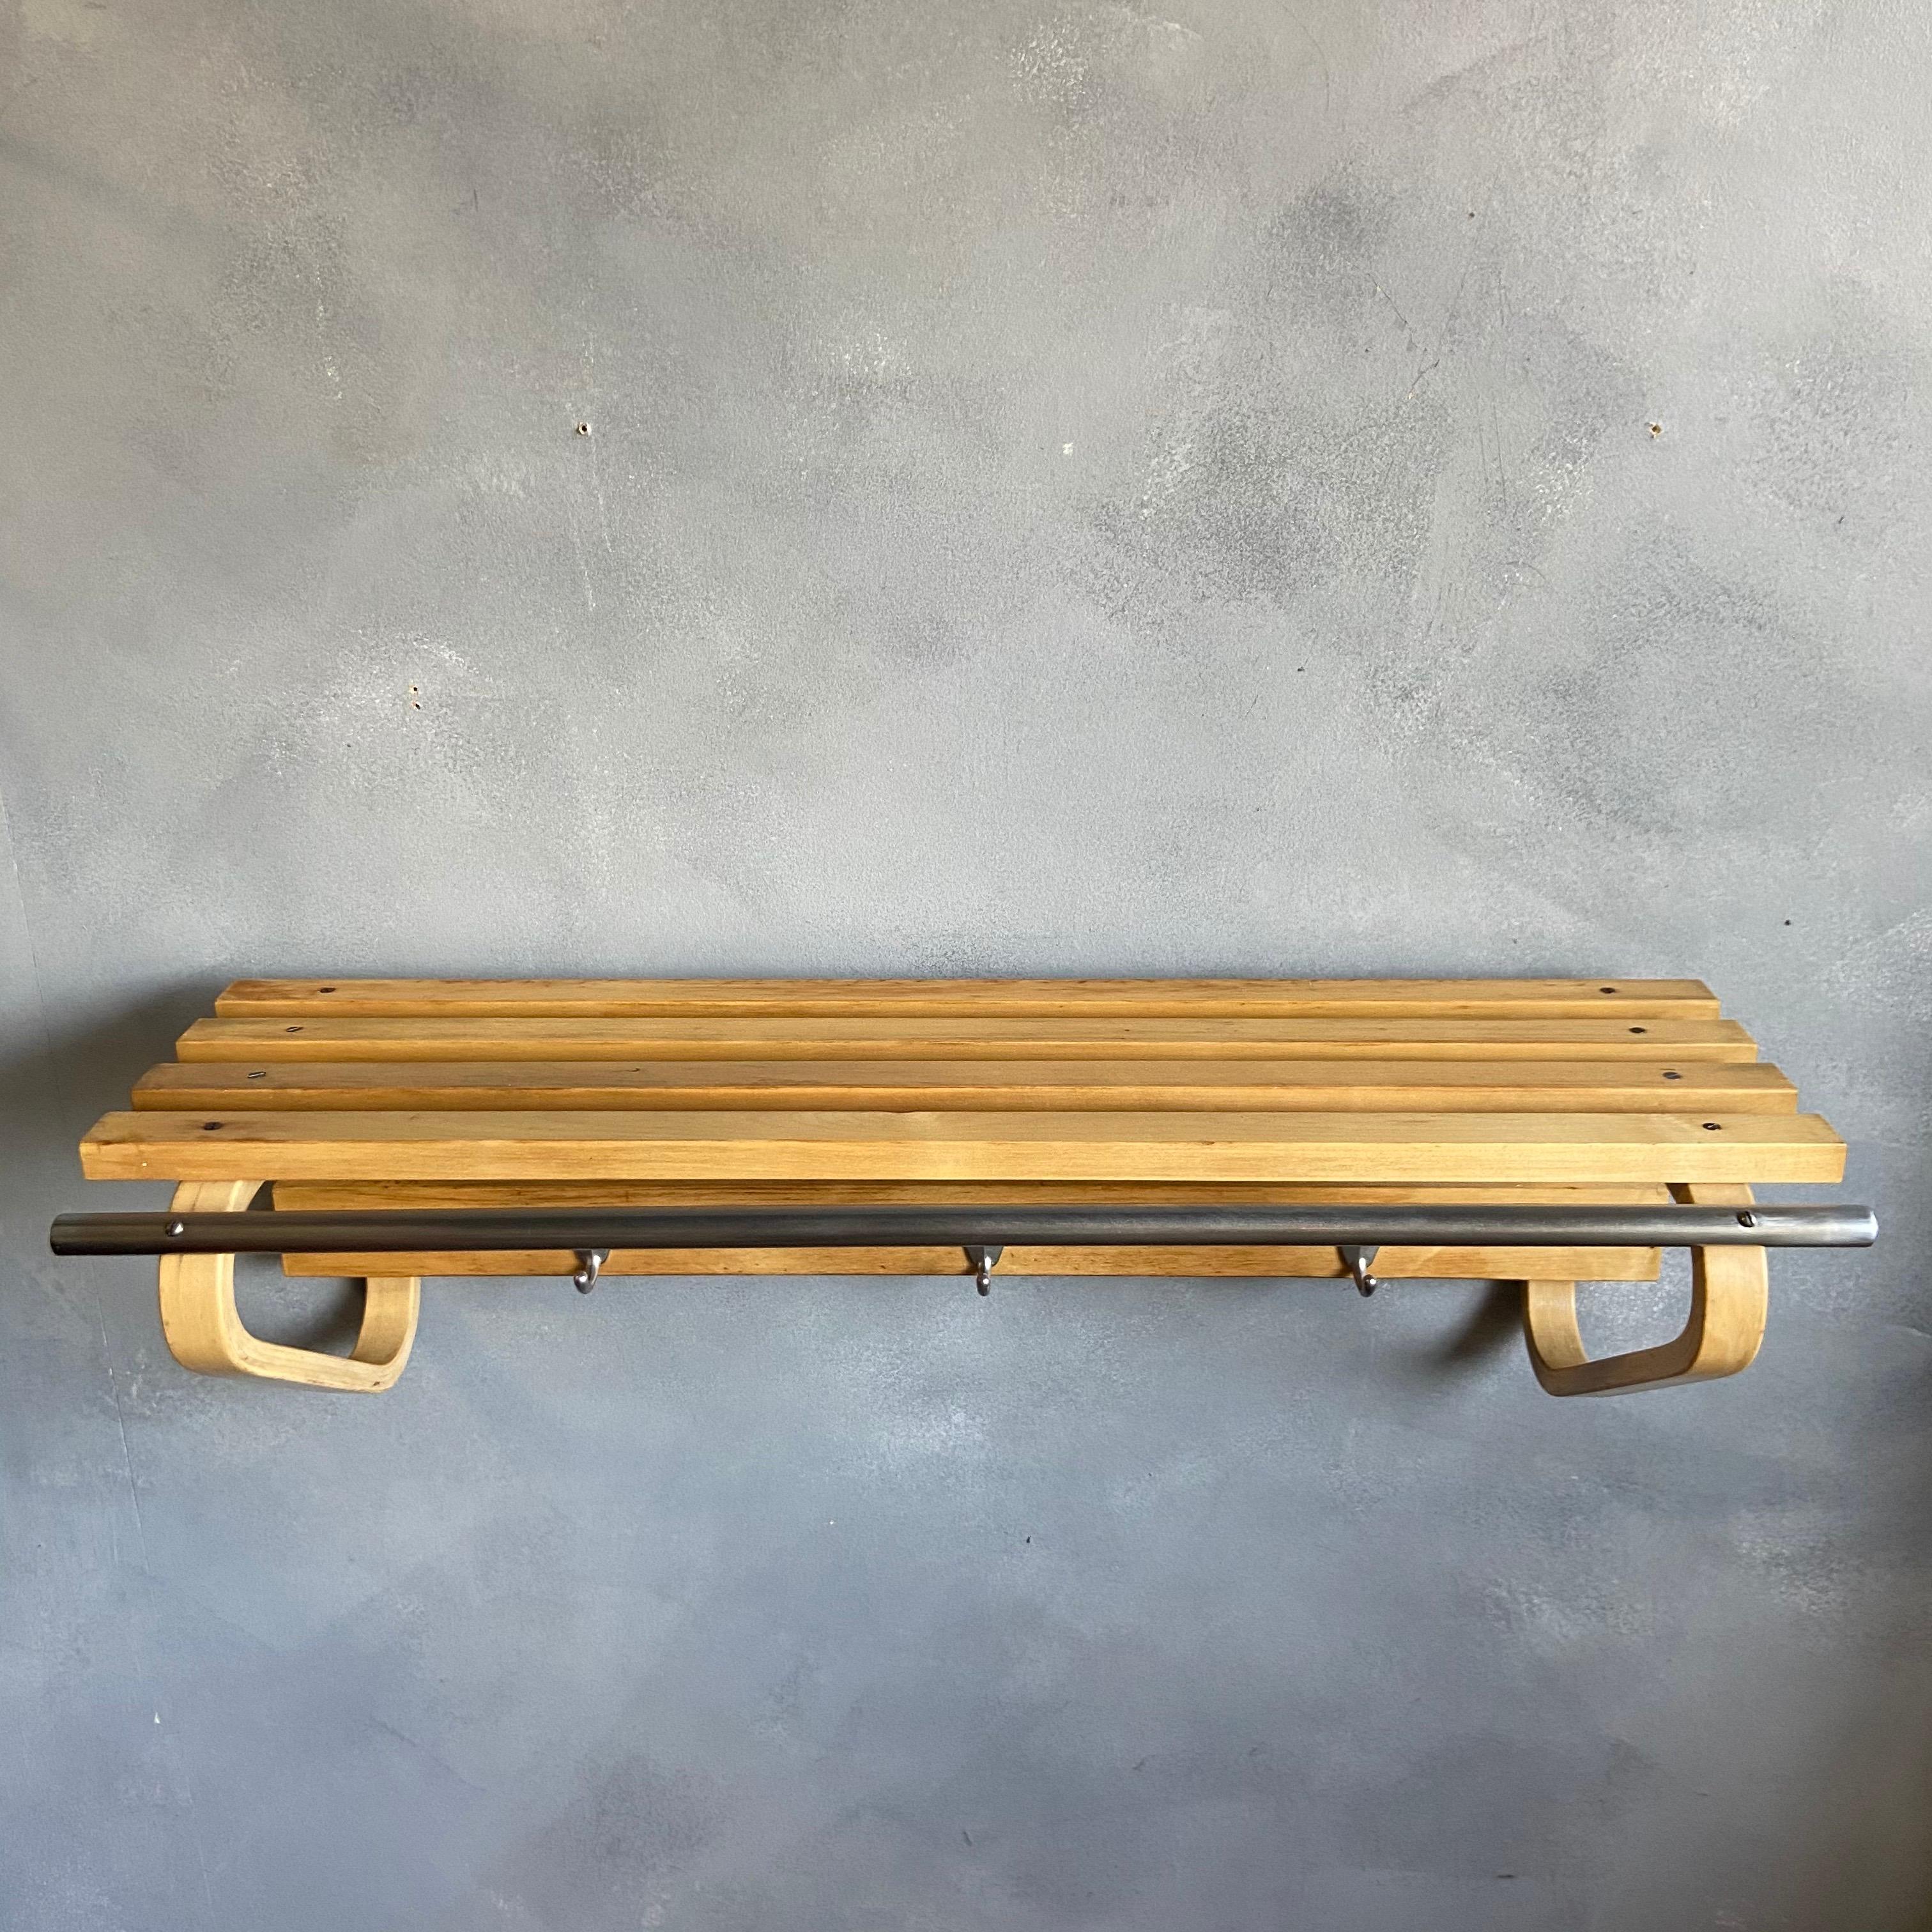 For your consideration is this original coat rack with shelf designed by Alvar Aalto for Artek circa 1960 featuring birch wood, metal coat hooks and early nickel plated steel hanger rod. We have been lucky to receive a few of these in our shop among